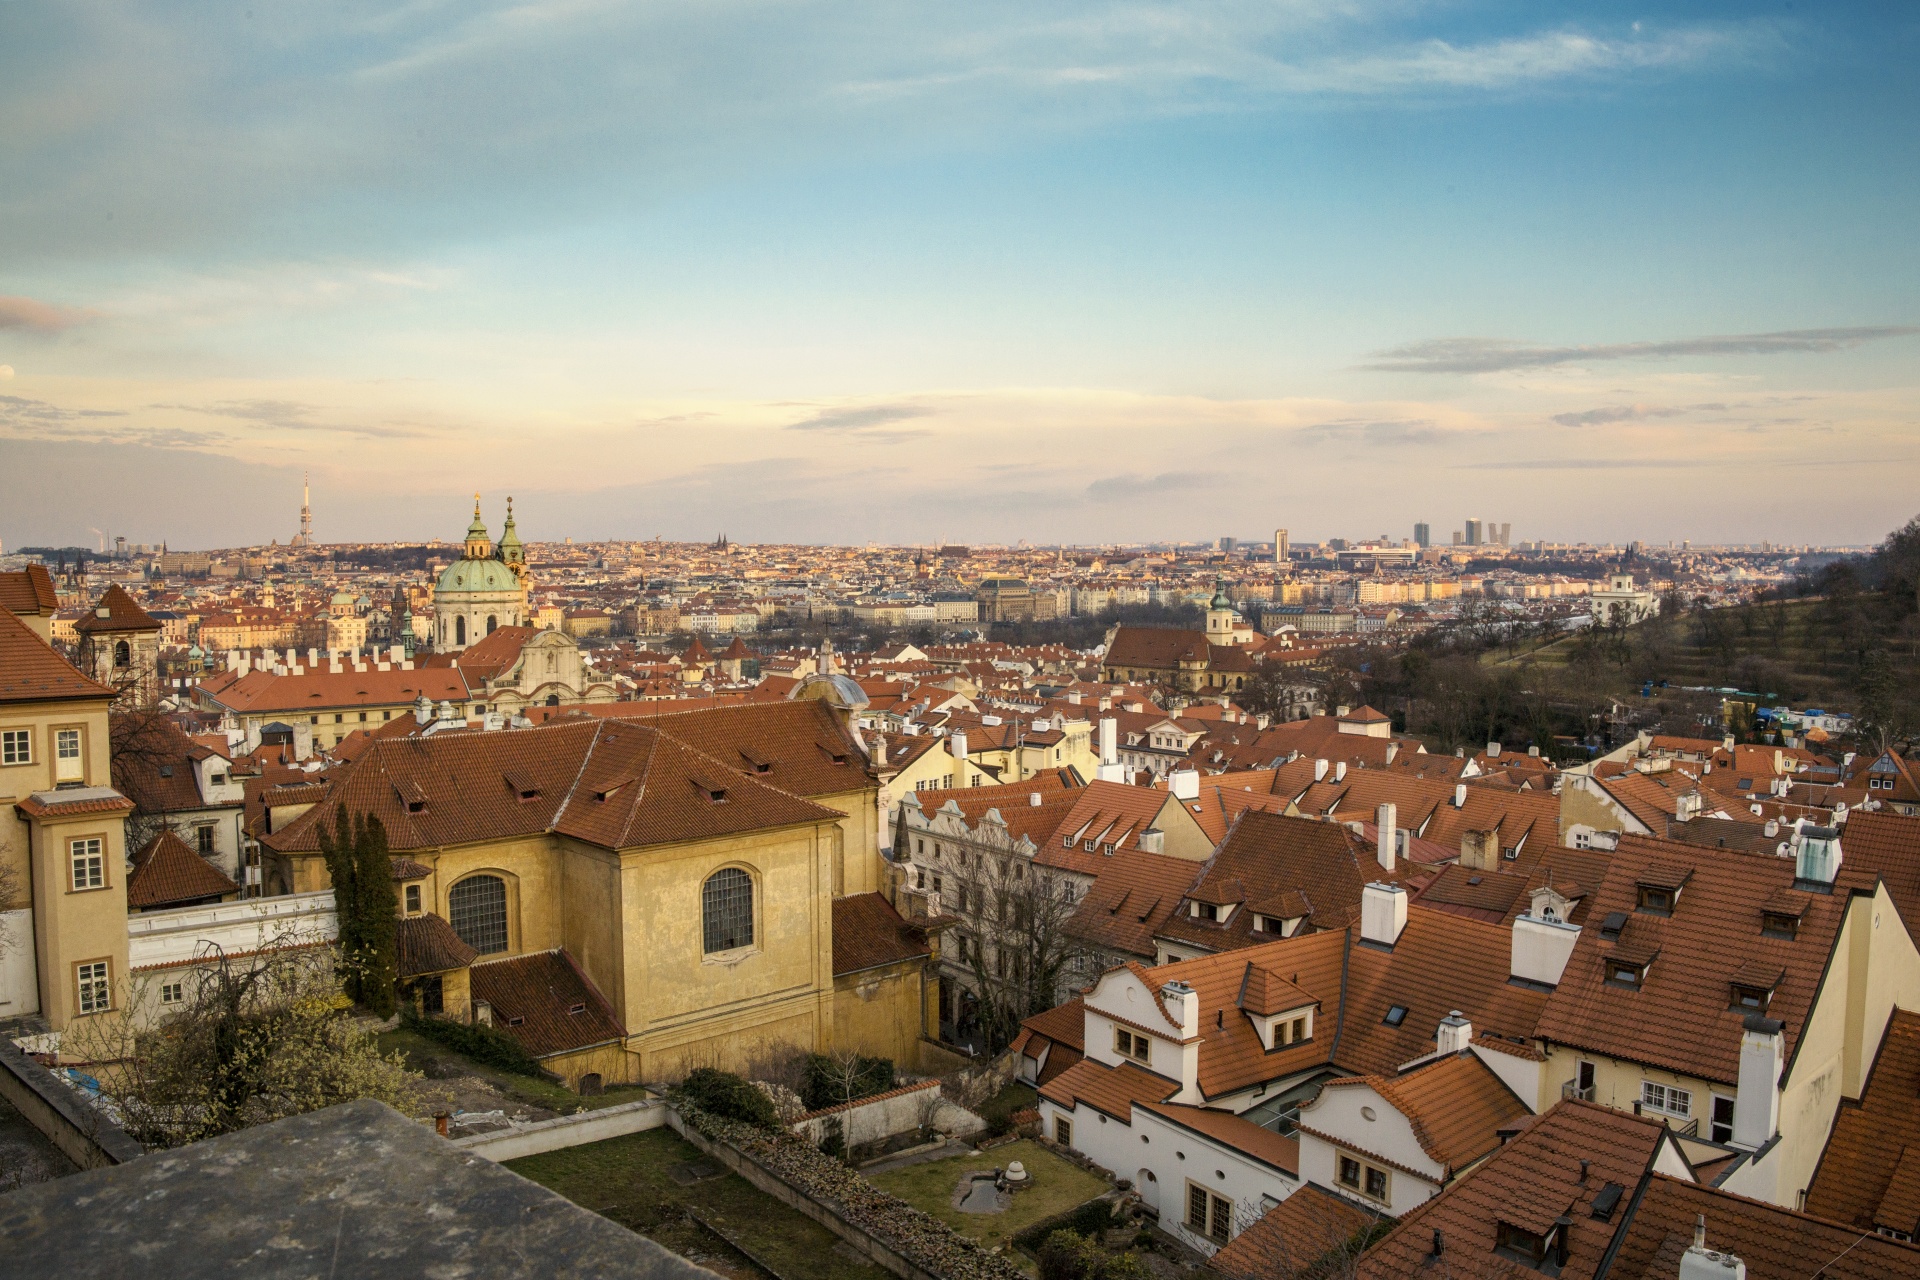 Above the roofs of Prague.